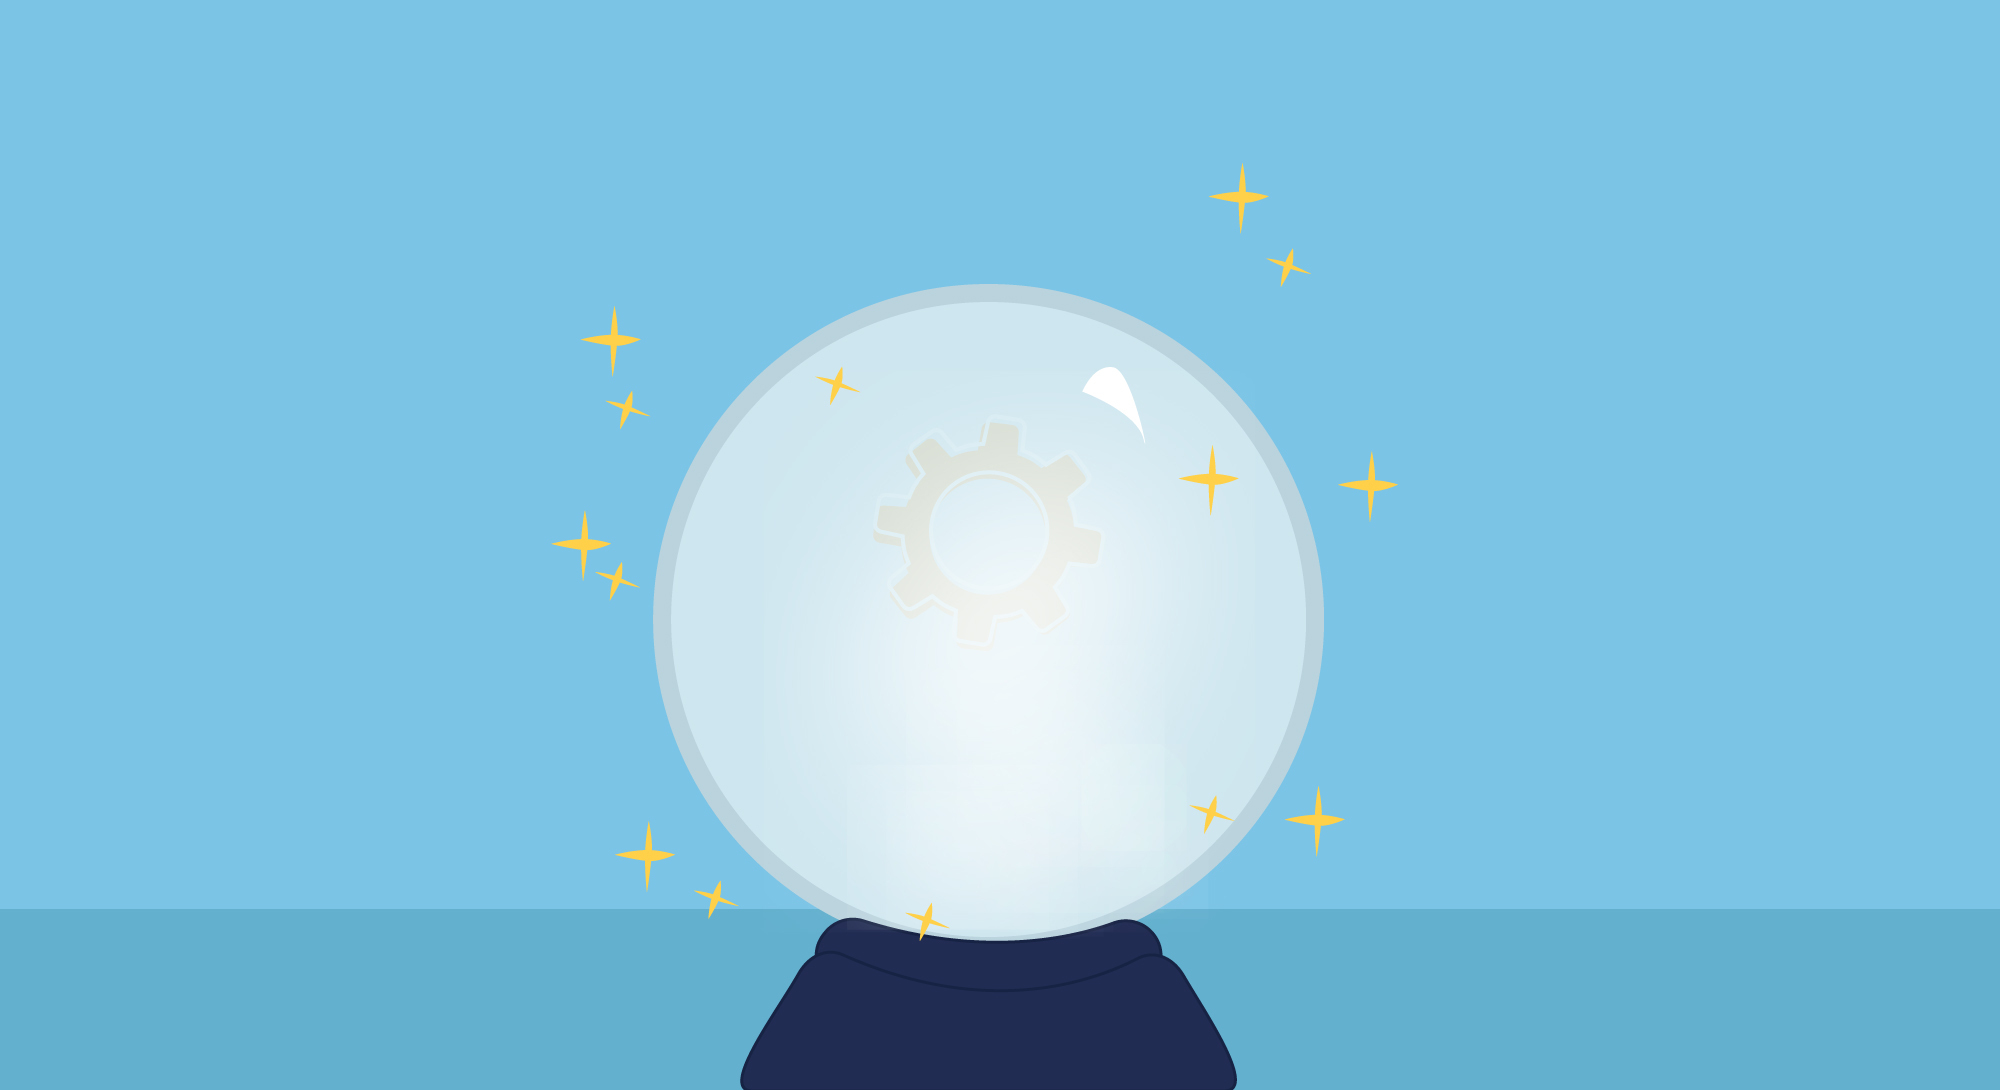 Illustration of a crystal ball on a light blue background